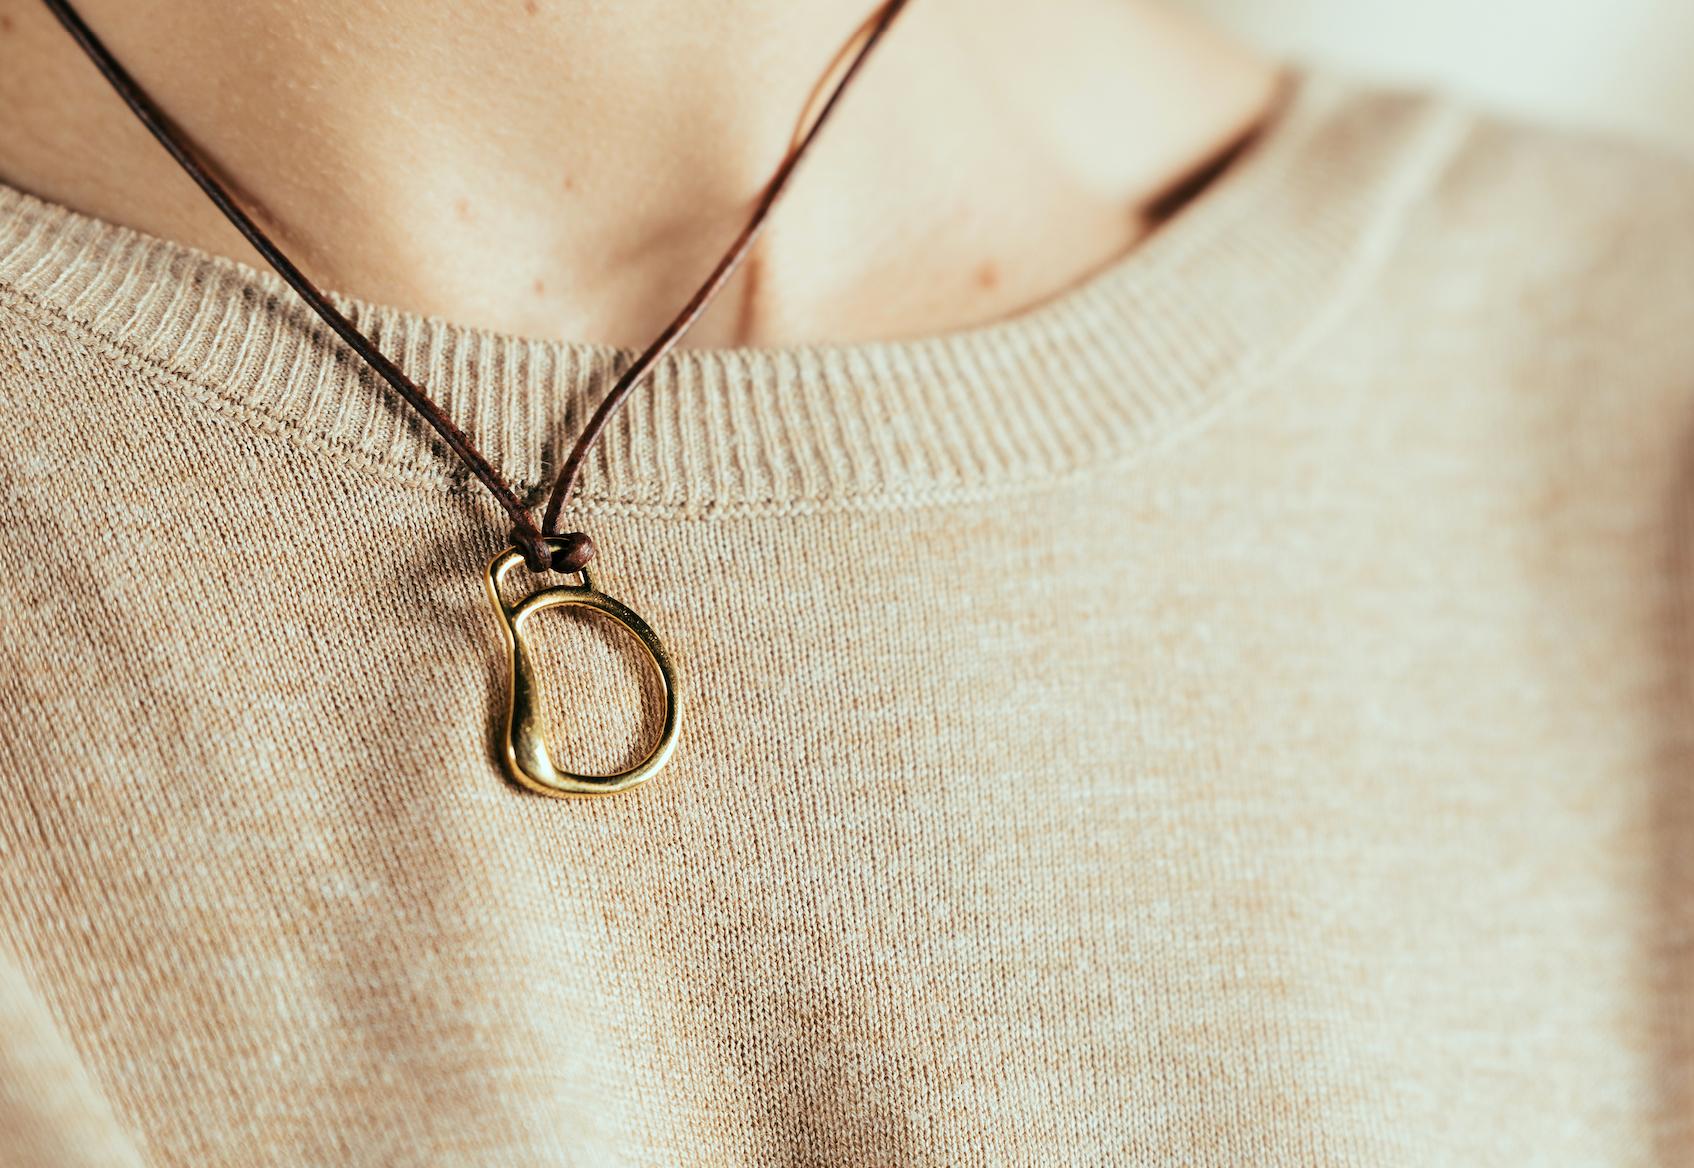 Part of the Vincent Peach Equestrian Collection, the Cheval Bit Necklace has a 14kt Yellow Gold Bit Design on a Premium Brown Leather Cord with a luxurious Tahitian Pearl Clasp. The Cheval Bit Necklace comes in the standard 17